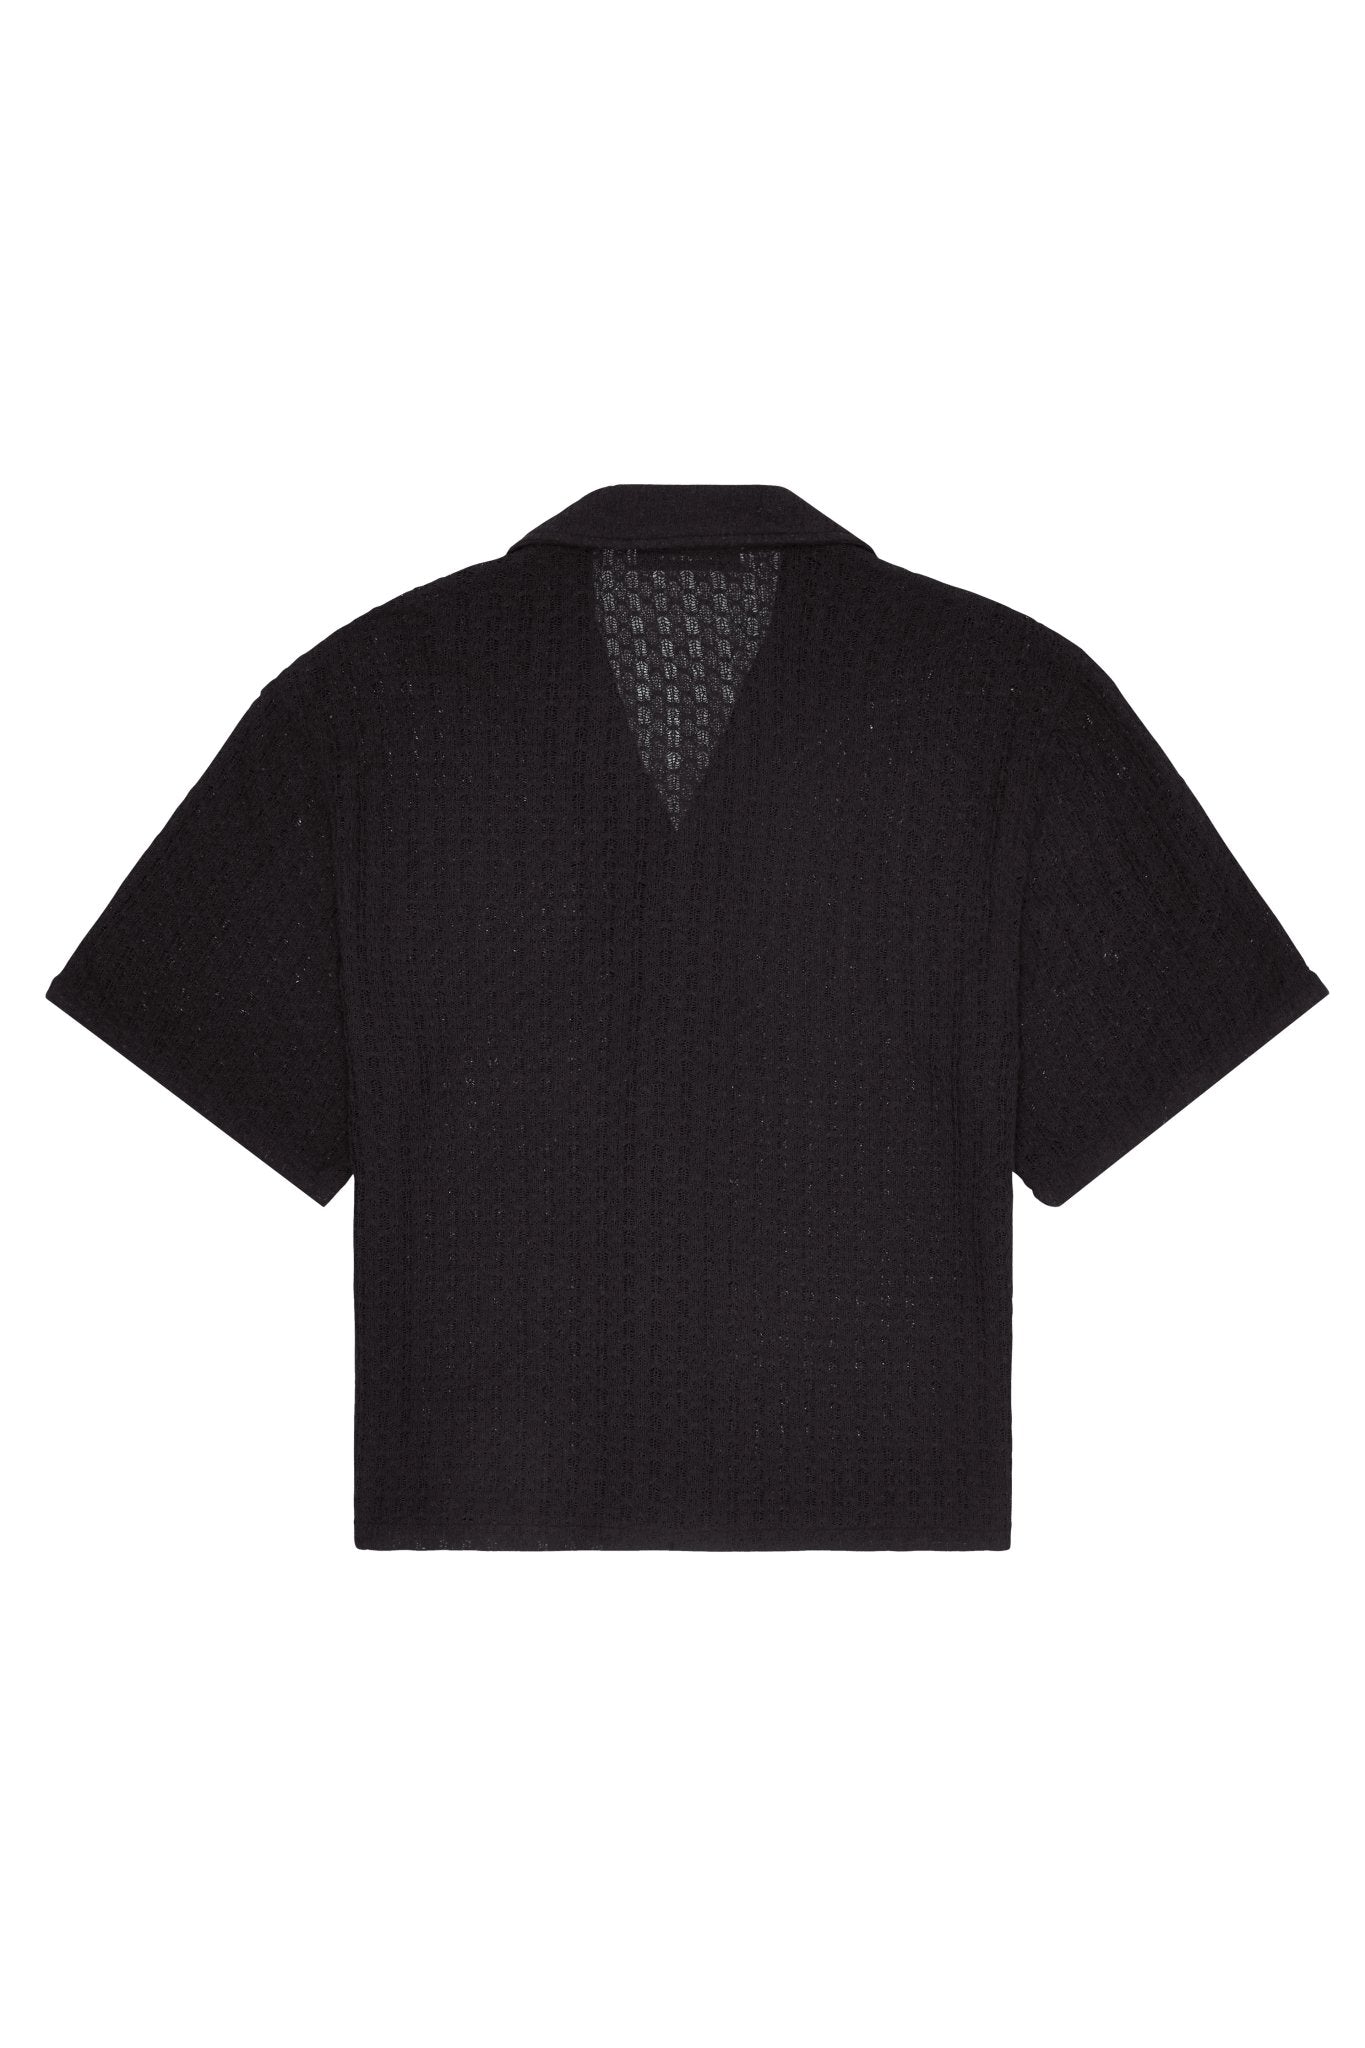 about---blank.comknitted shirt black